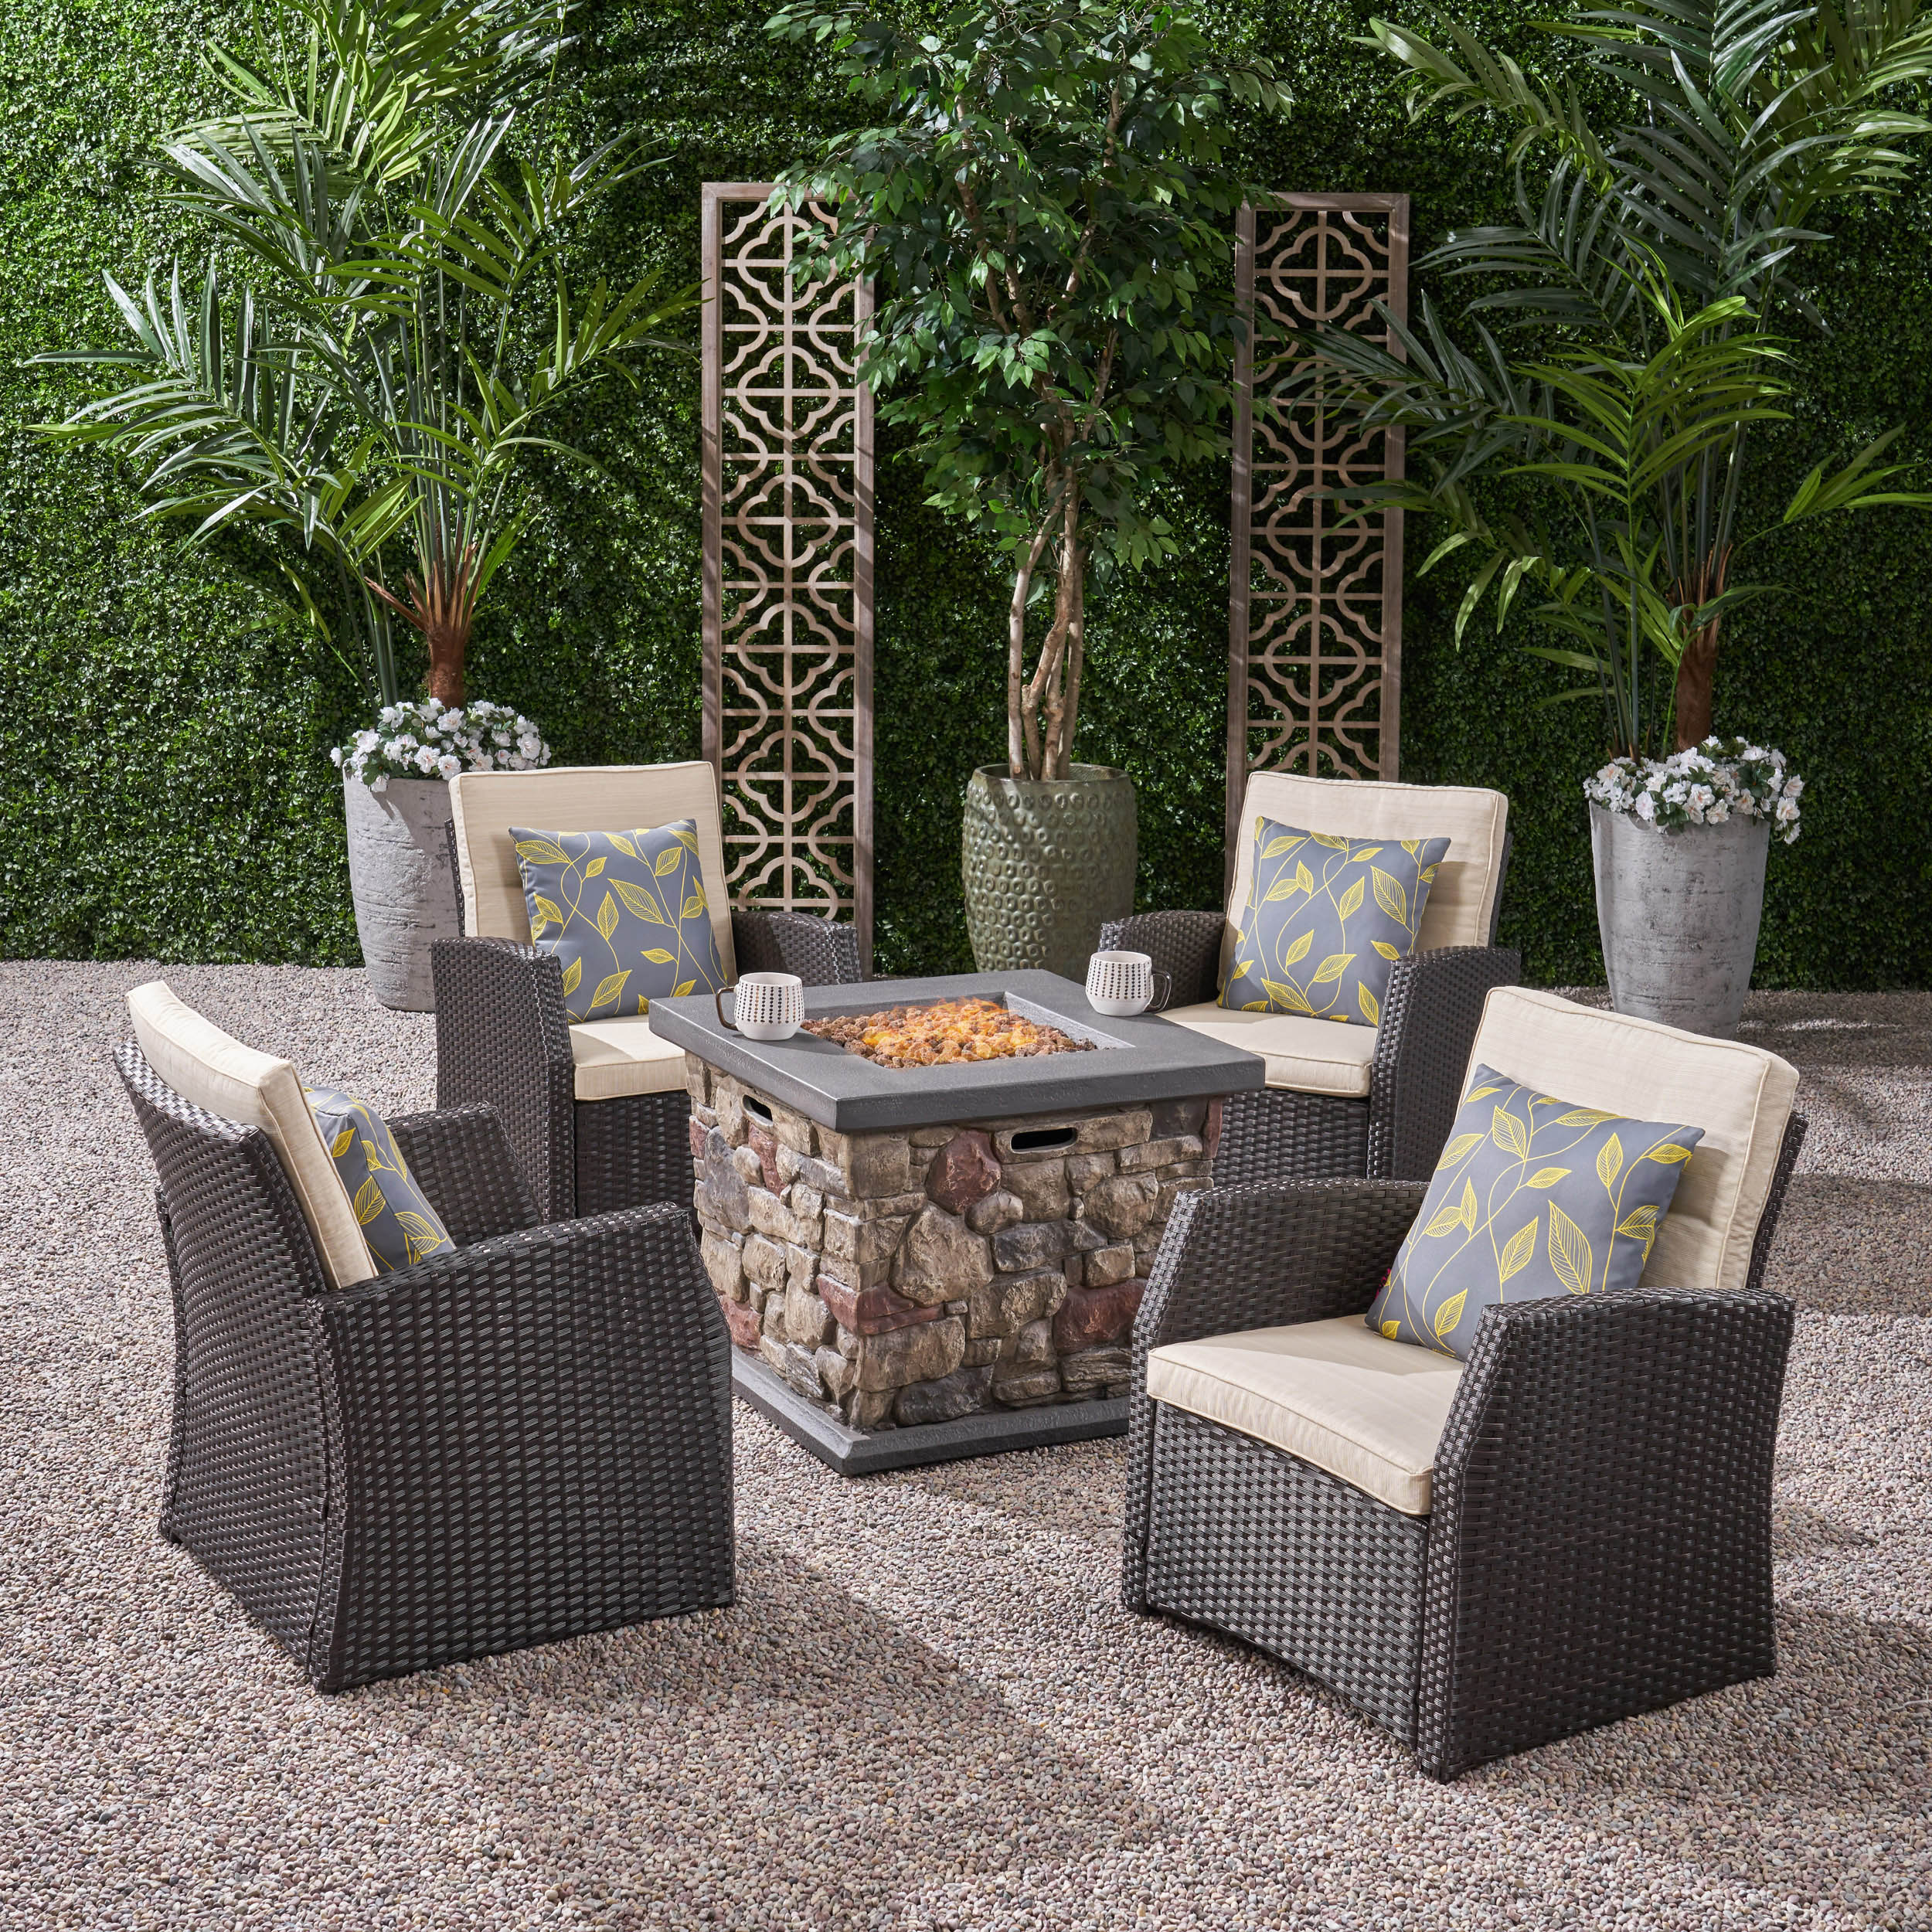 Bexley Conversation Set with 30 Inch Lightweight Concrete Fire Pit and Cushioned Wicker Club Chairs, Set of 4, Dark Brown, Beige, Stone - image 1 of 7